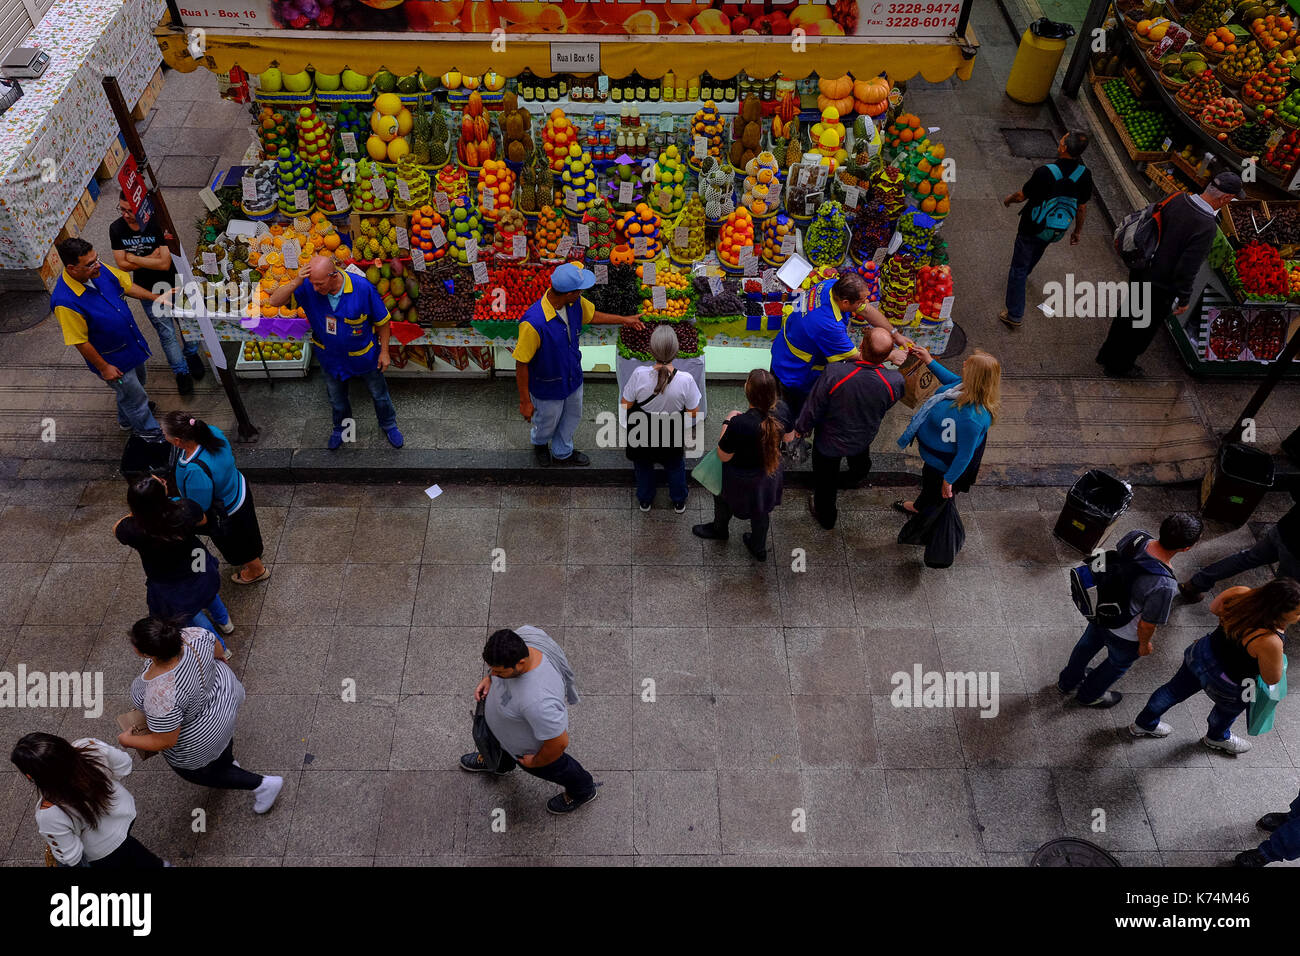 The life in the Mercado Municipal in Sao Paulo, Brazil with vendors and costumers around a fruit and vegetable stand, people walking by Stock Photo